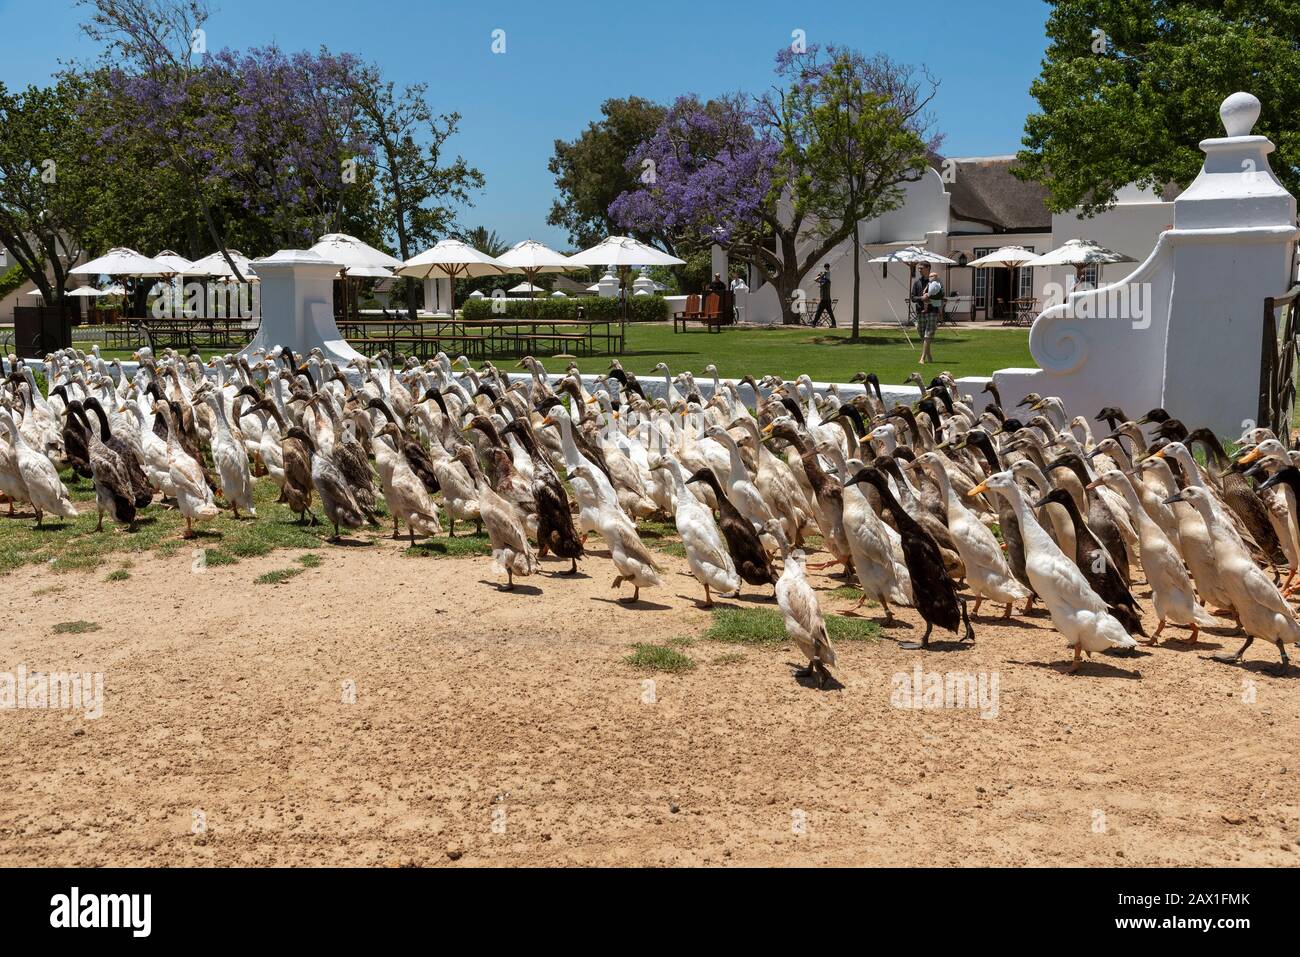 Faure, Stellenbosh, South Africa. Dec 2019. The flock of Indian Runner ducks waddle past the homestead at Vergenoegt wine estate at Faure, South Afric Stock Photo